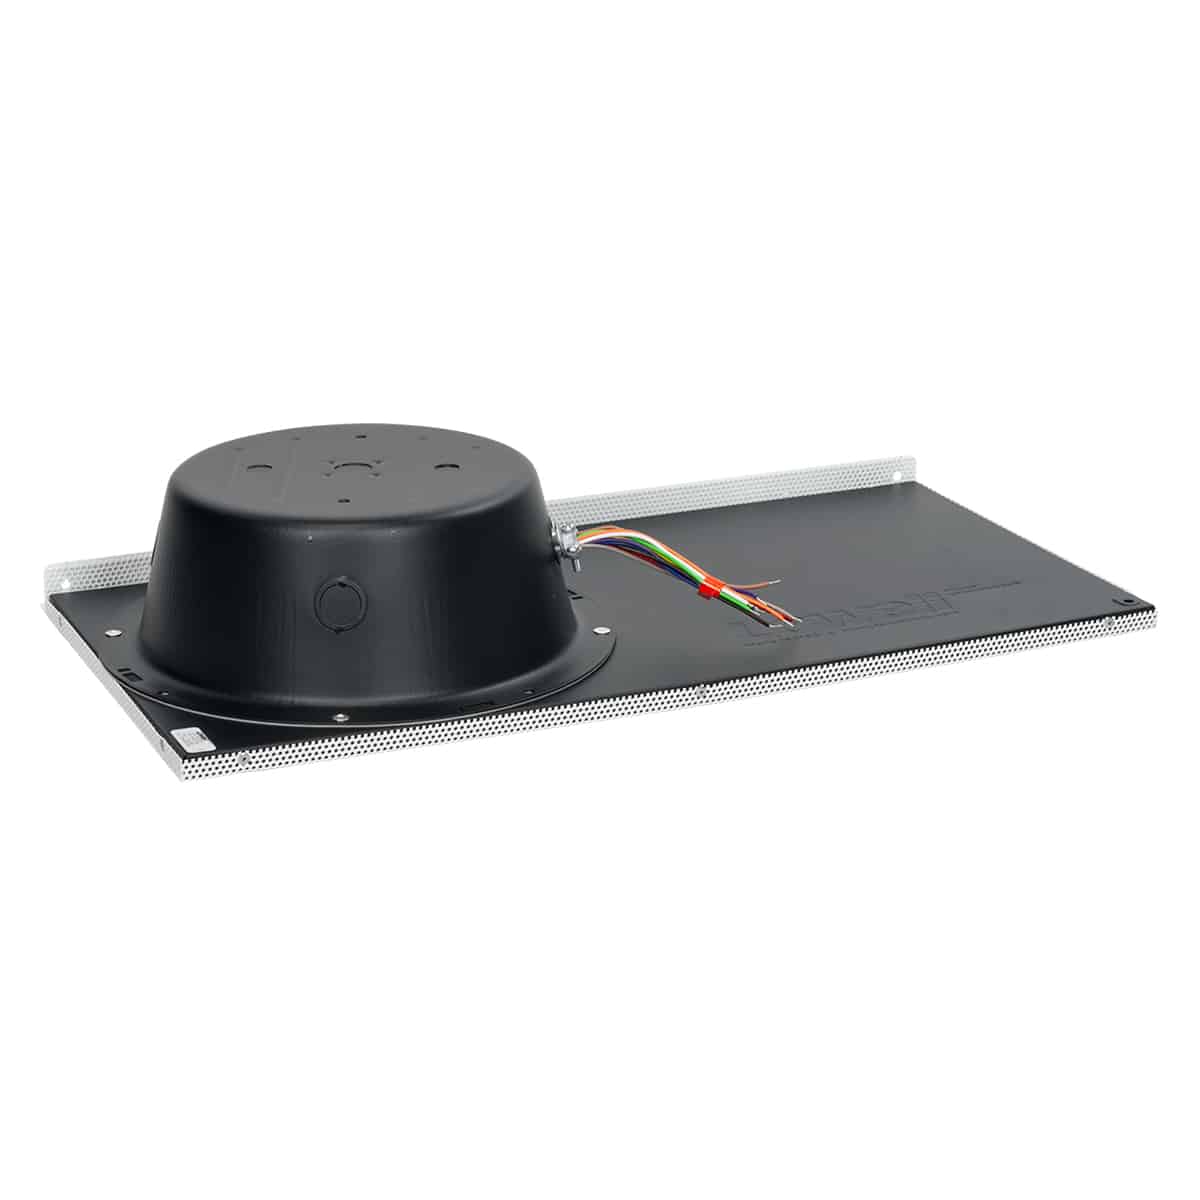 Ceiling speaker with volume control